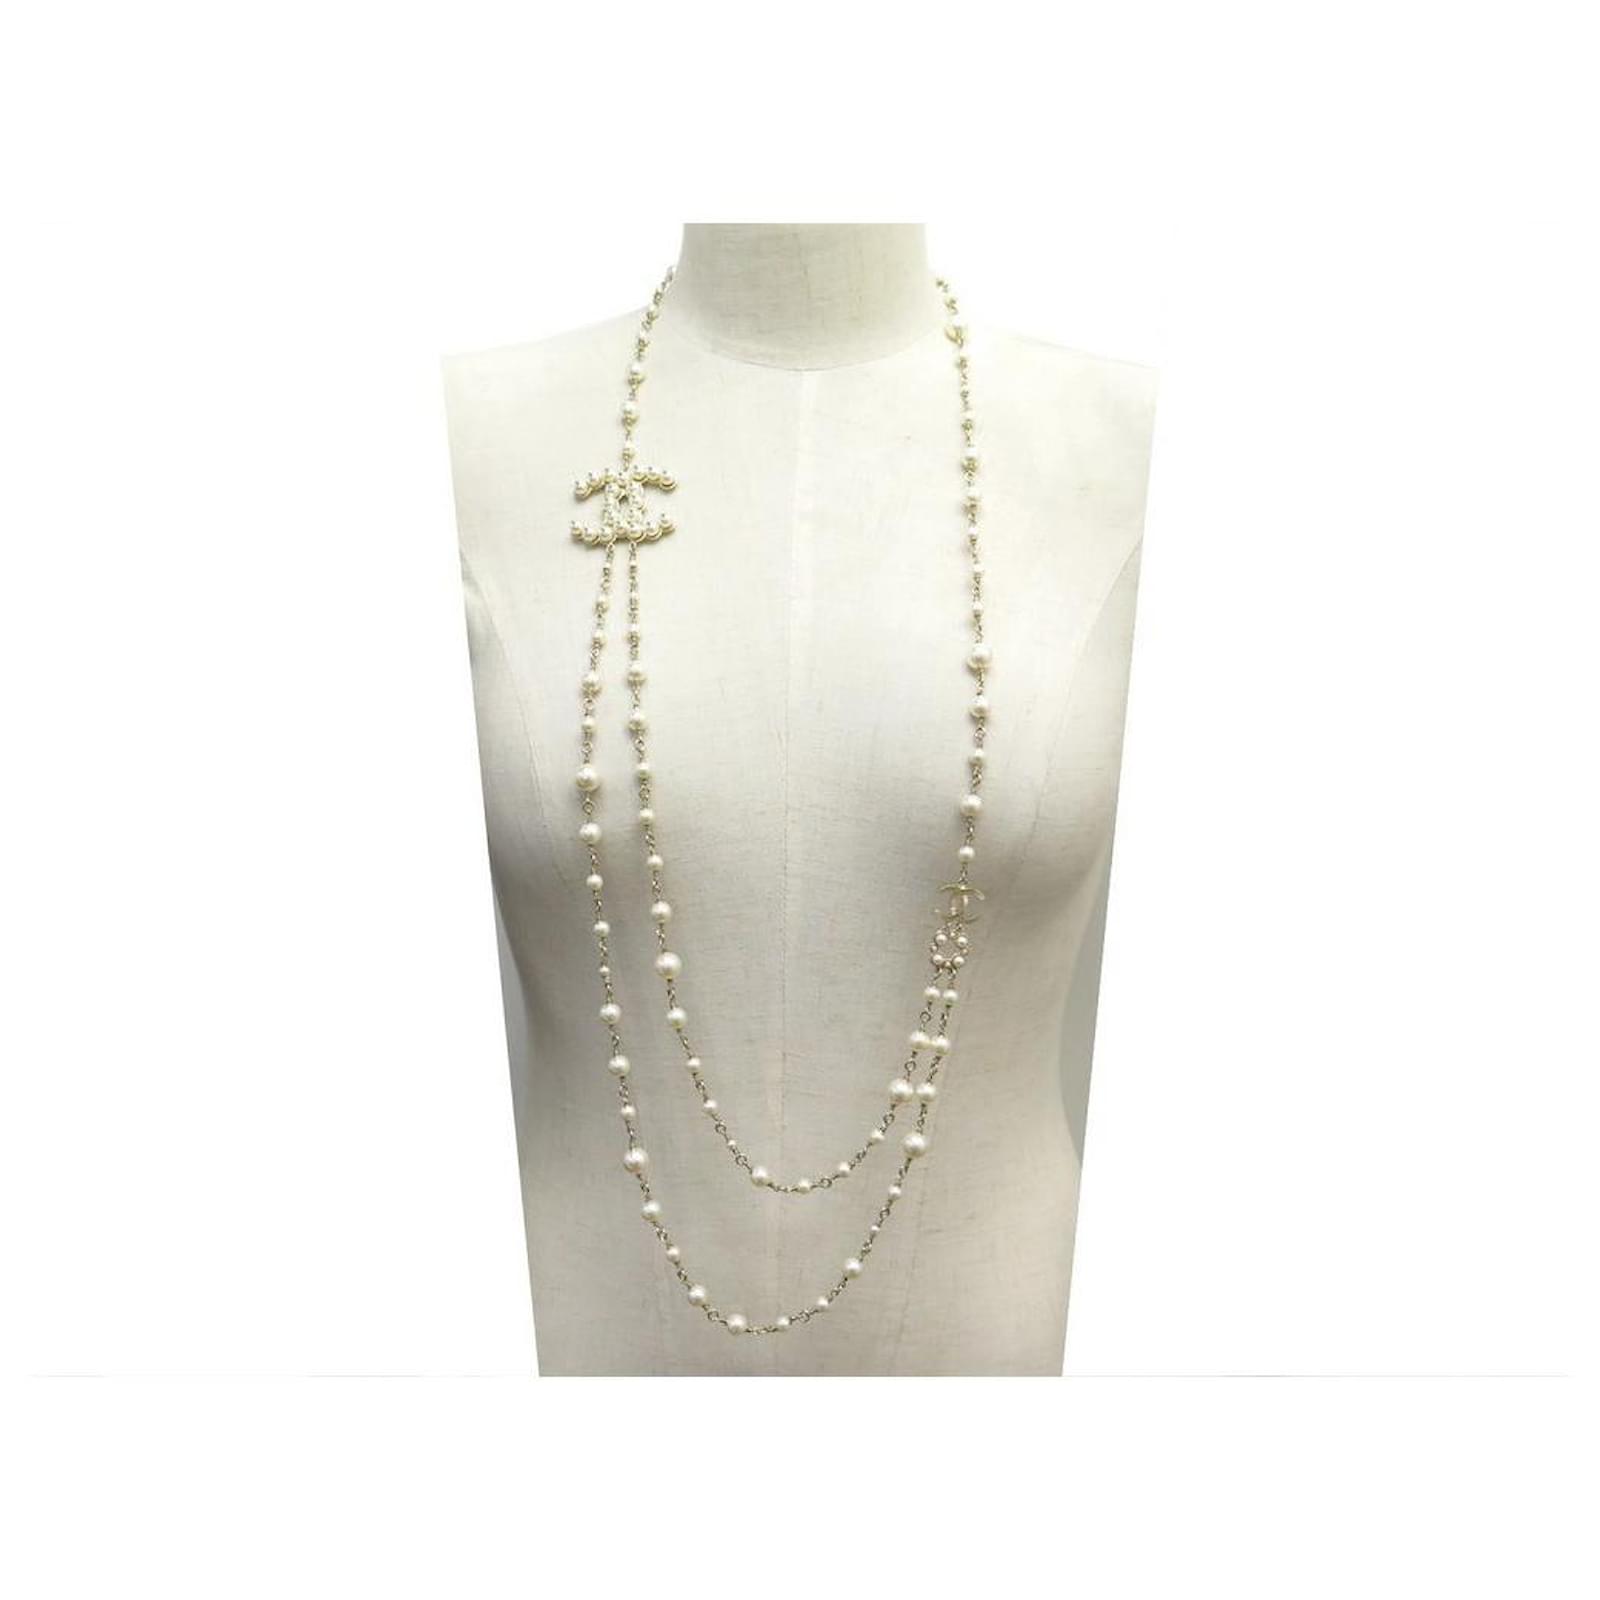 NEW CHANEL NECKLACE SAUTOIR LOGO CC & GOLDEN PEARLS + BOX PEARLS NECKLACE